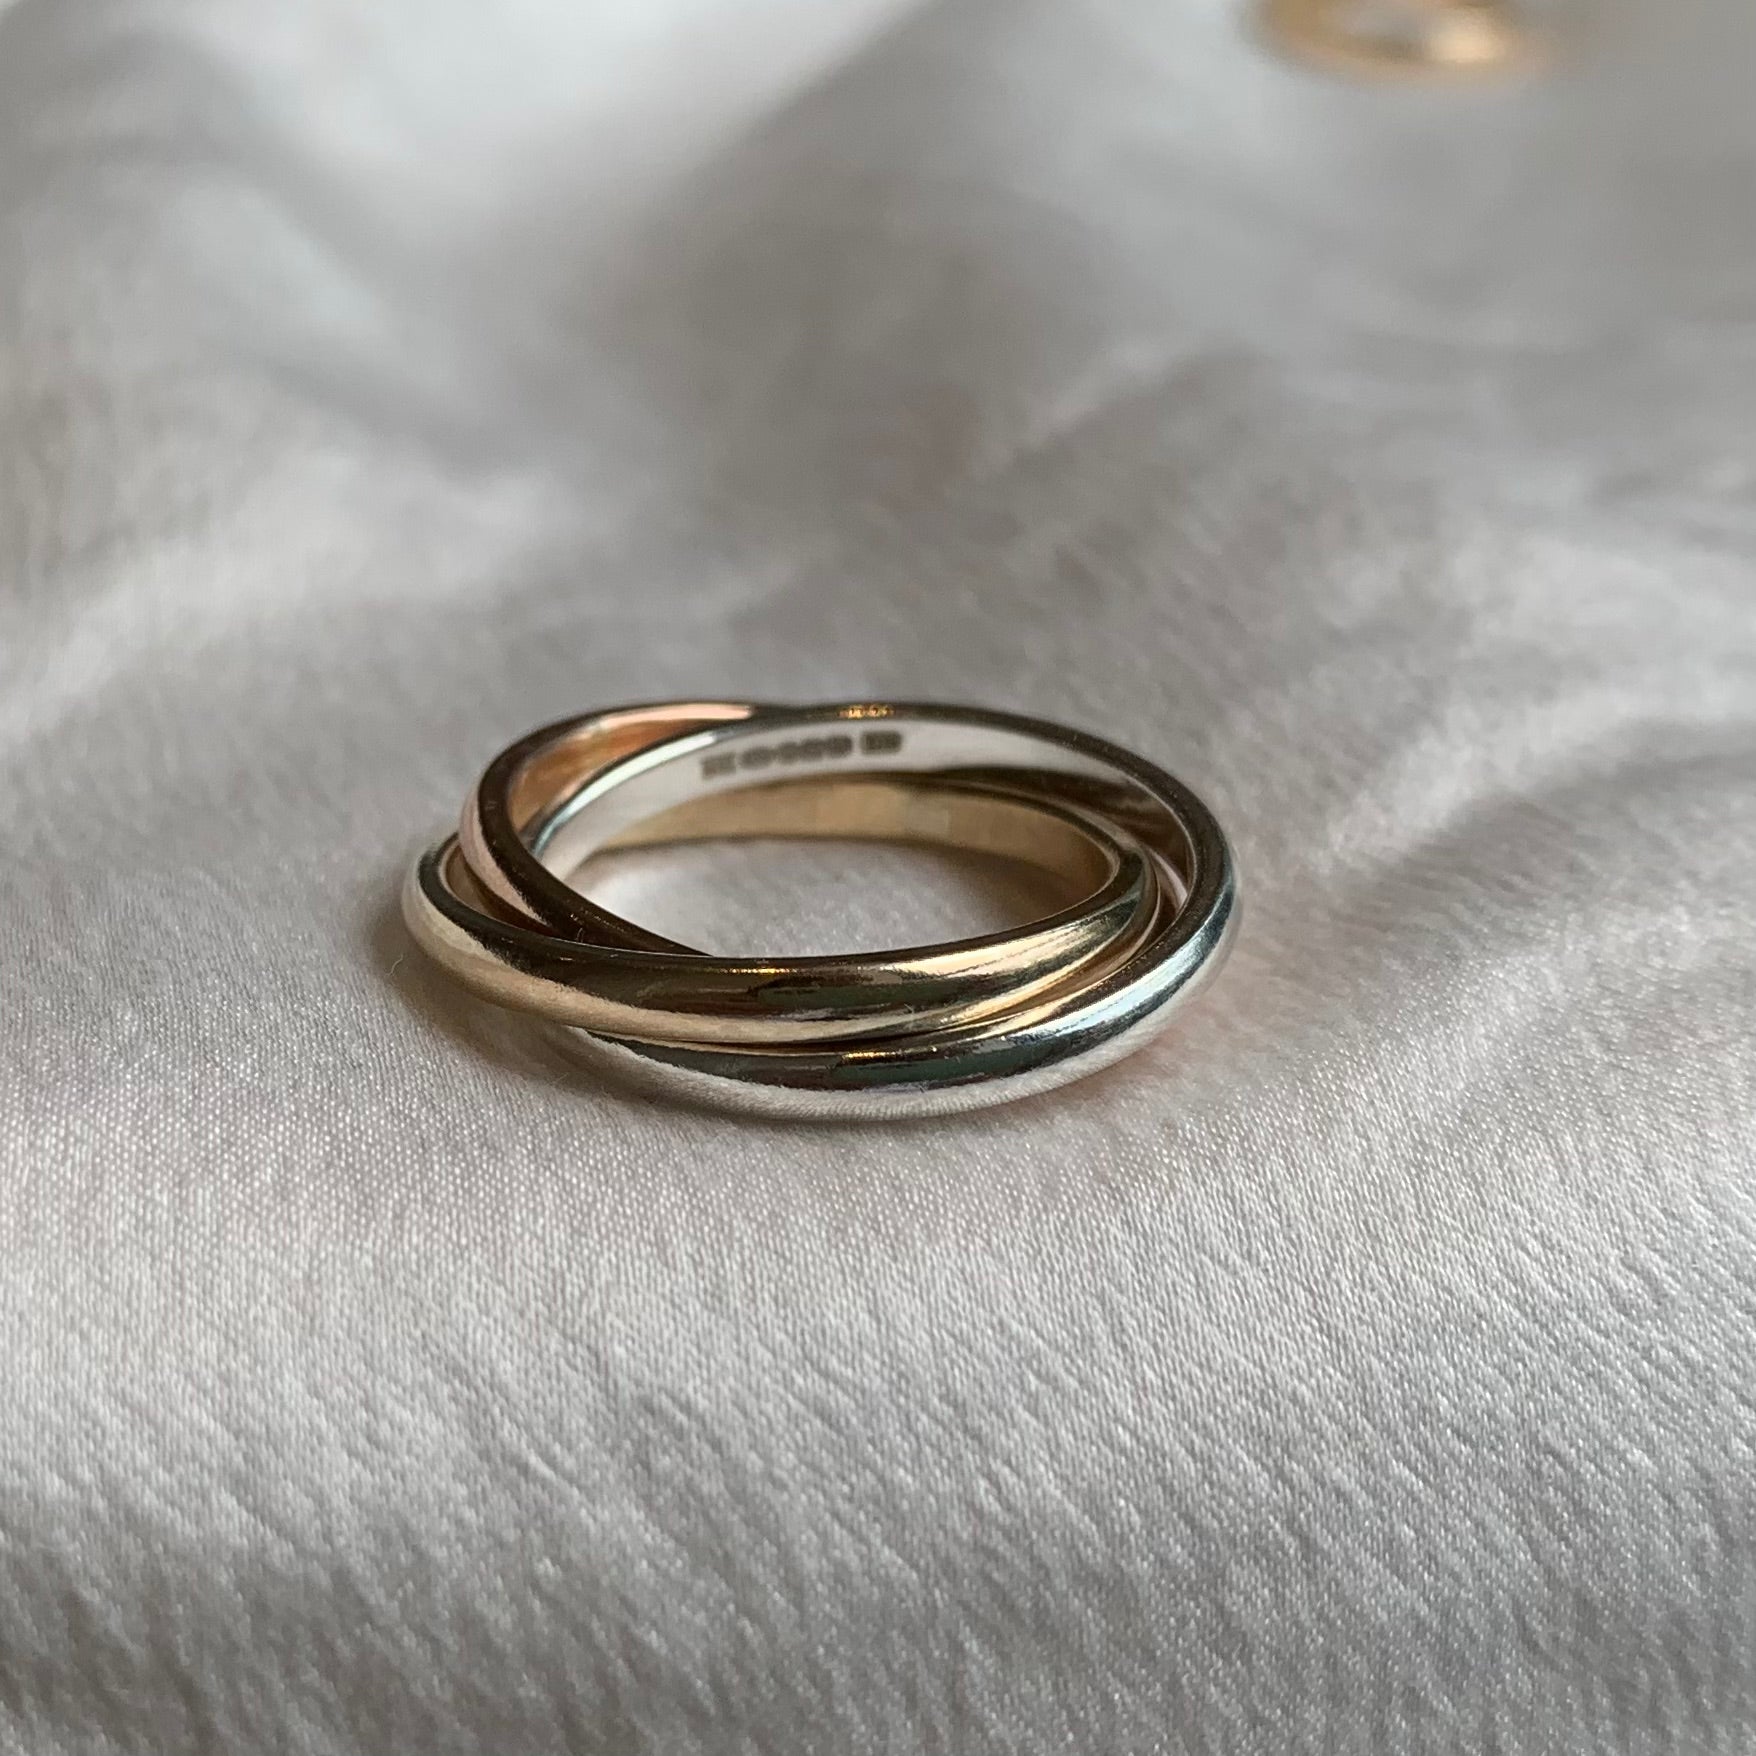 A triple-interlocking Russian wedding ring featuring a sterling silver band, a 9ct yellow gold band and a 9ct rose gold band.